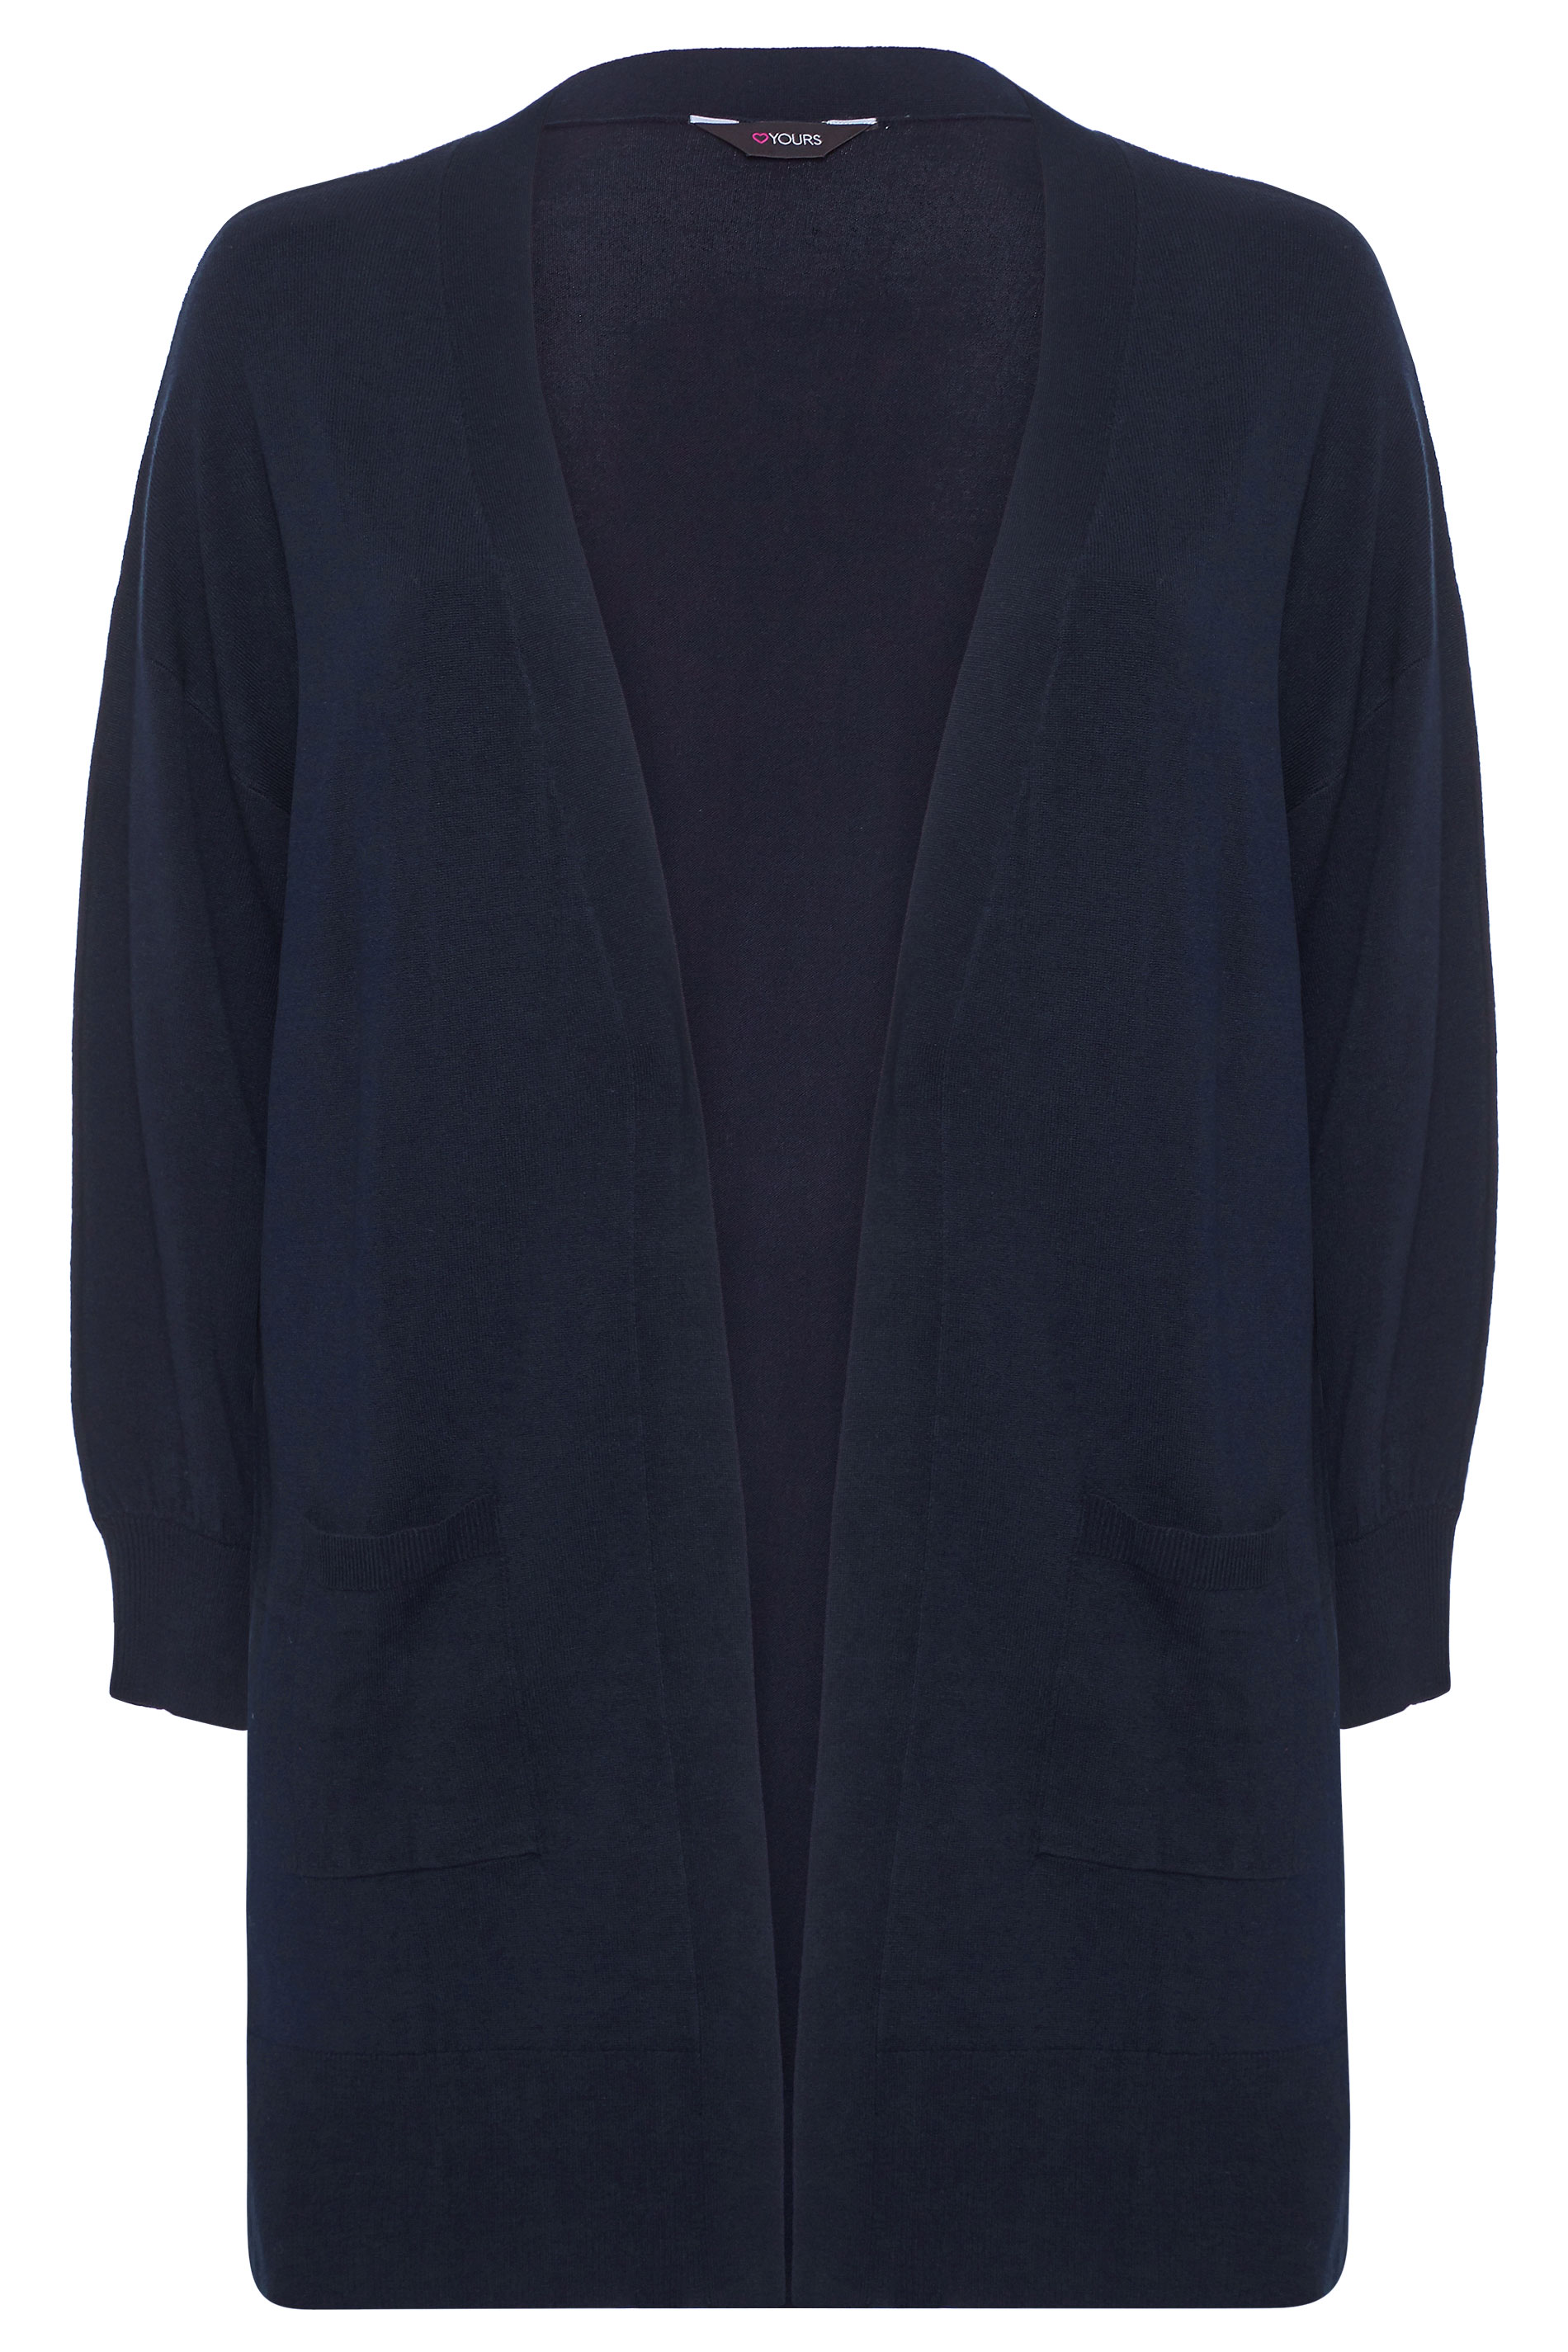 Plus Size Curve Navy Blue Balloon Sleeve Fine Knit Cardigan | Yours Clothing